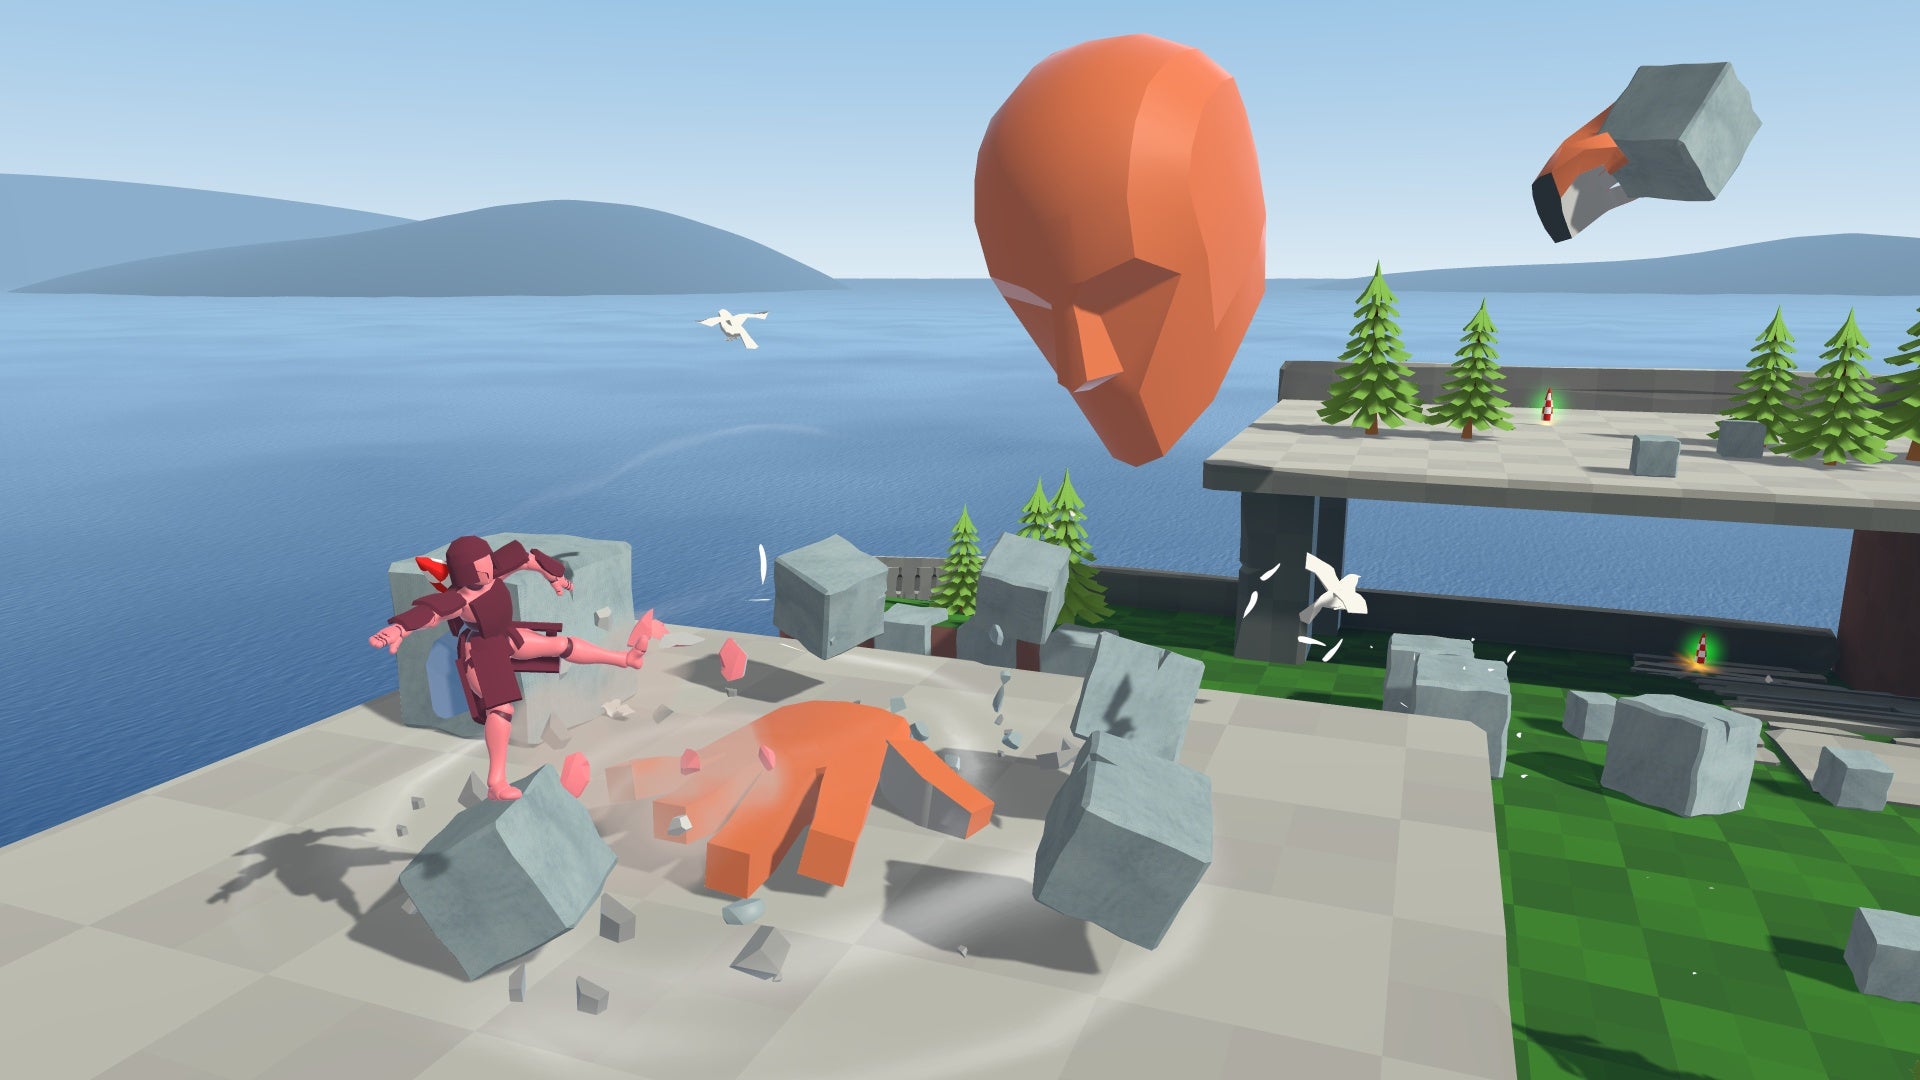 A screenshot of Davigo showing a giant floating head swatting at a small polygonal man with a disconnected giant hand.